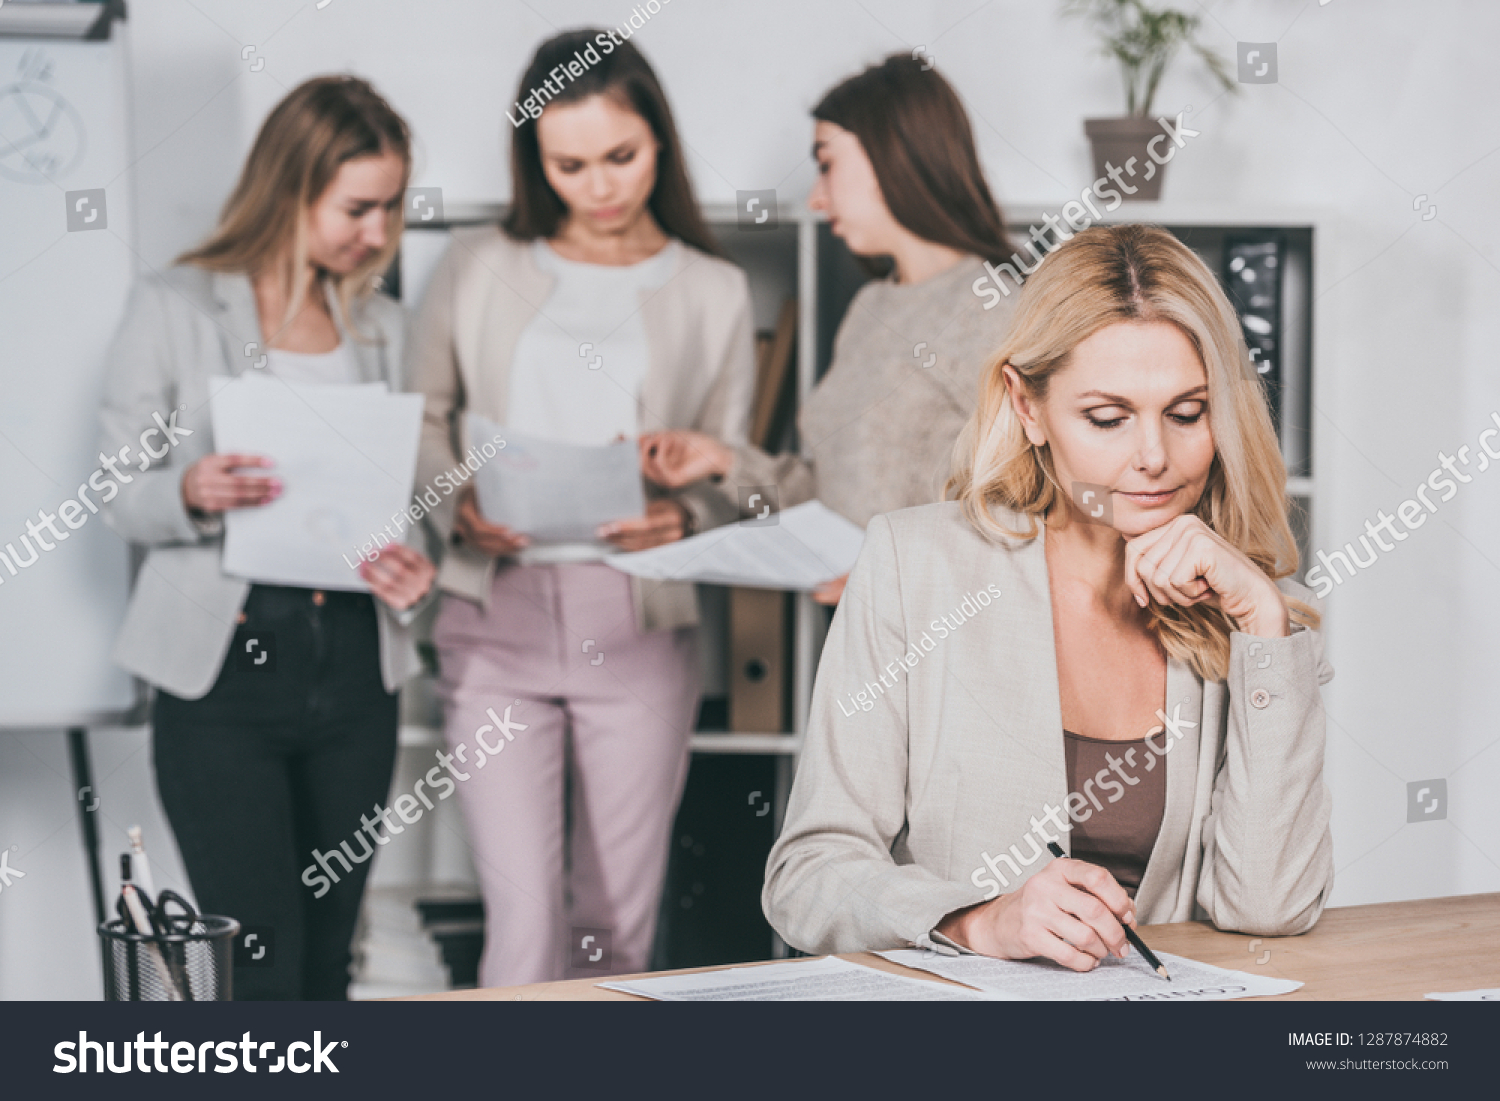 mature businesswoman working with contract and young businesswomen discussing papers behind in office #1287874882